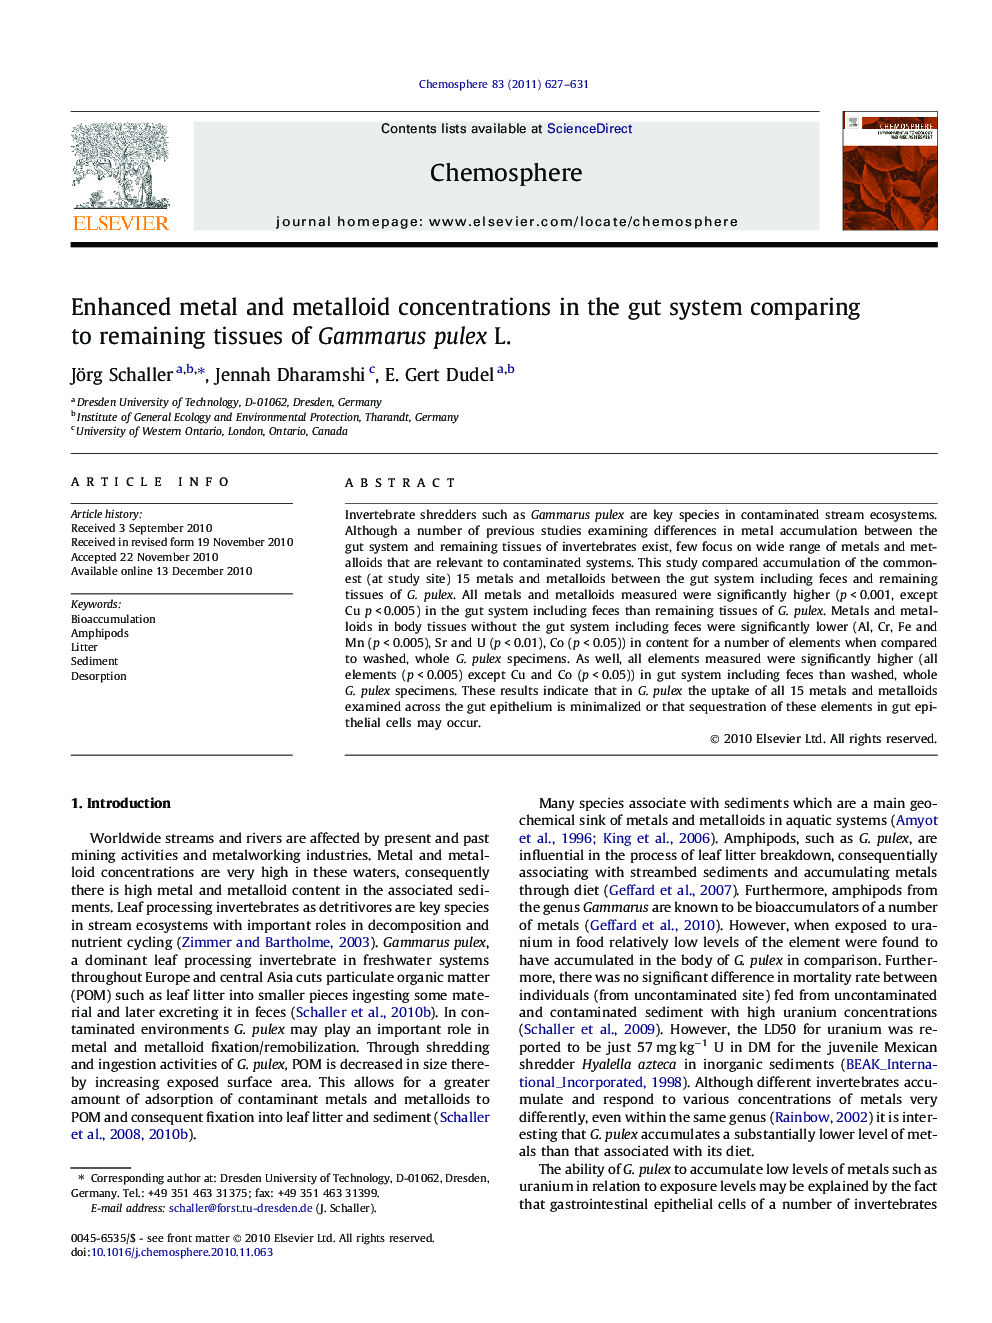 Enhanced metal and metalloid concentrations in the gut system comparing to remaining tissues of Gammarus pulex L.